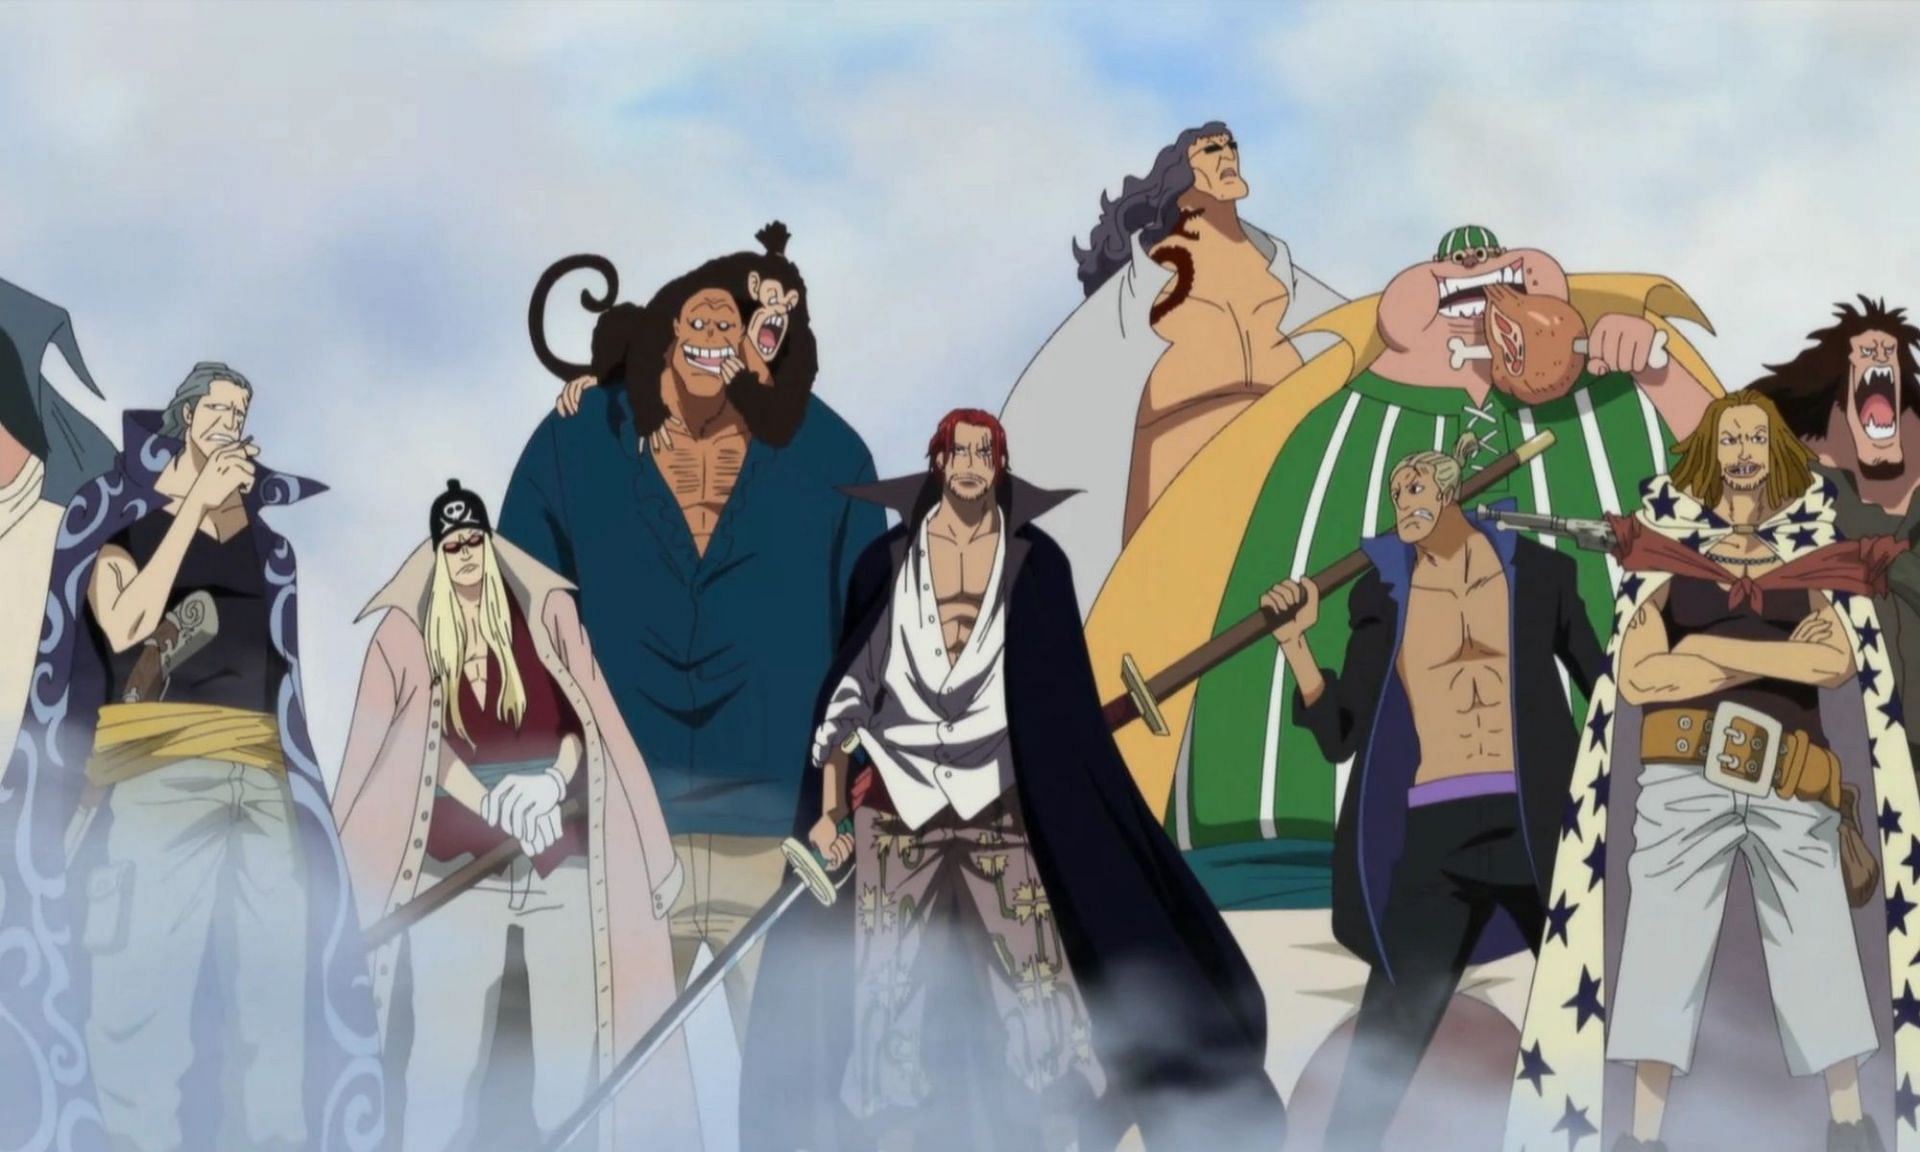 The Red Hair Pirates have yet to be seen fighting seriously in the One Piece series (Image Credits: Eiichiro Oda/Shueisha, Viz Media, One Piece)